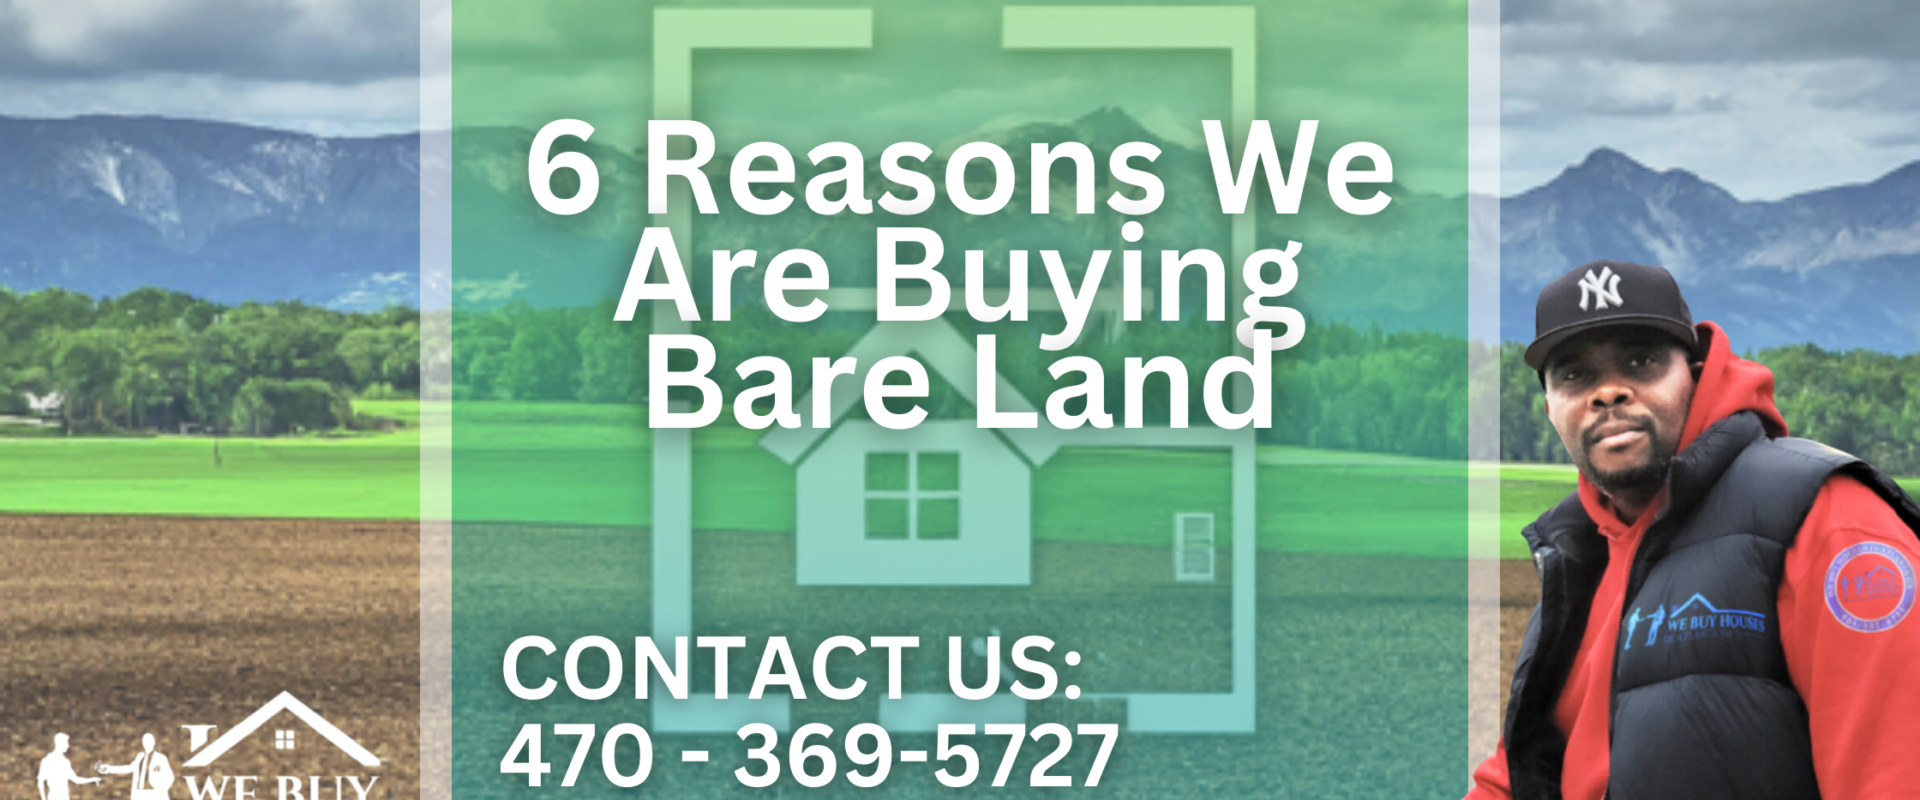 6 Reasons We Are Buying Bare Land